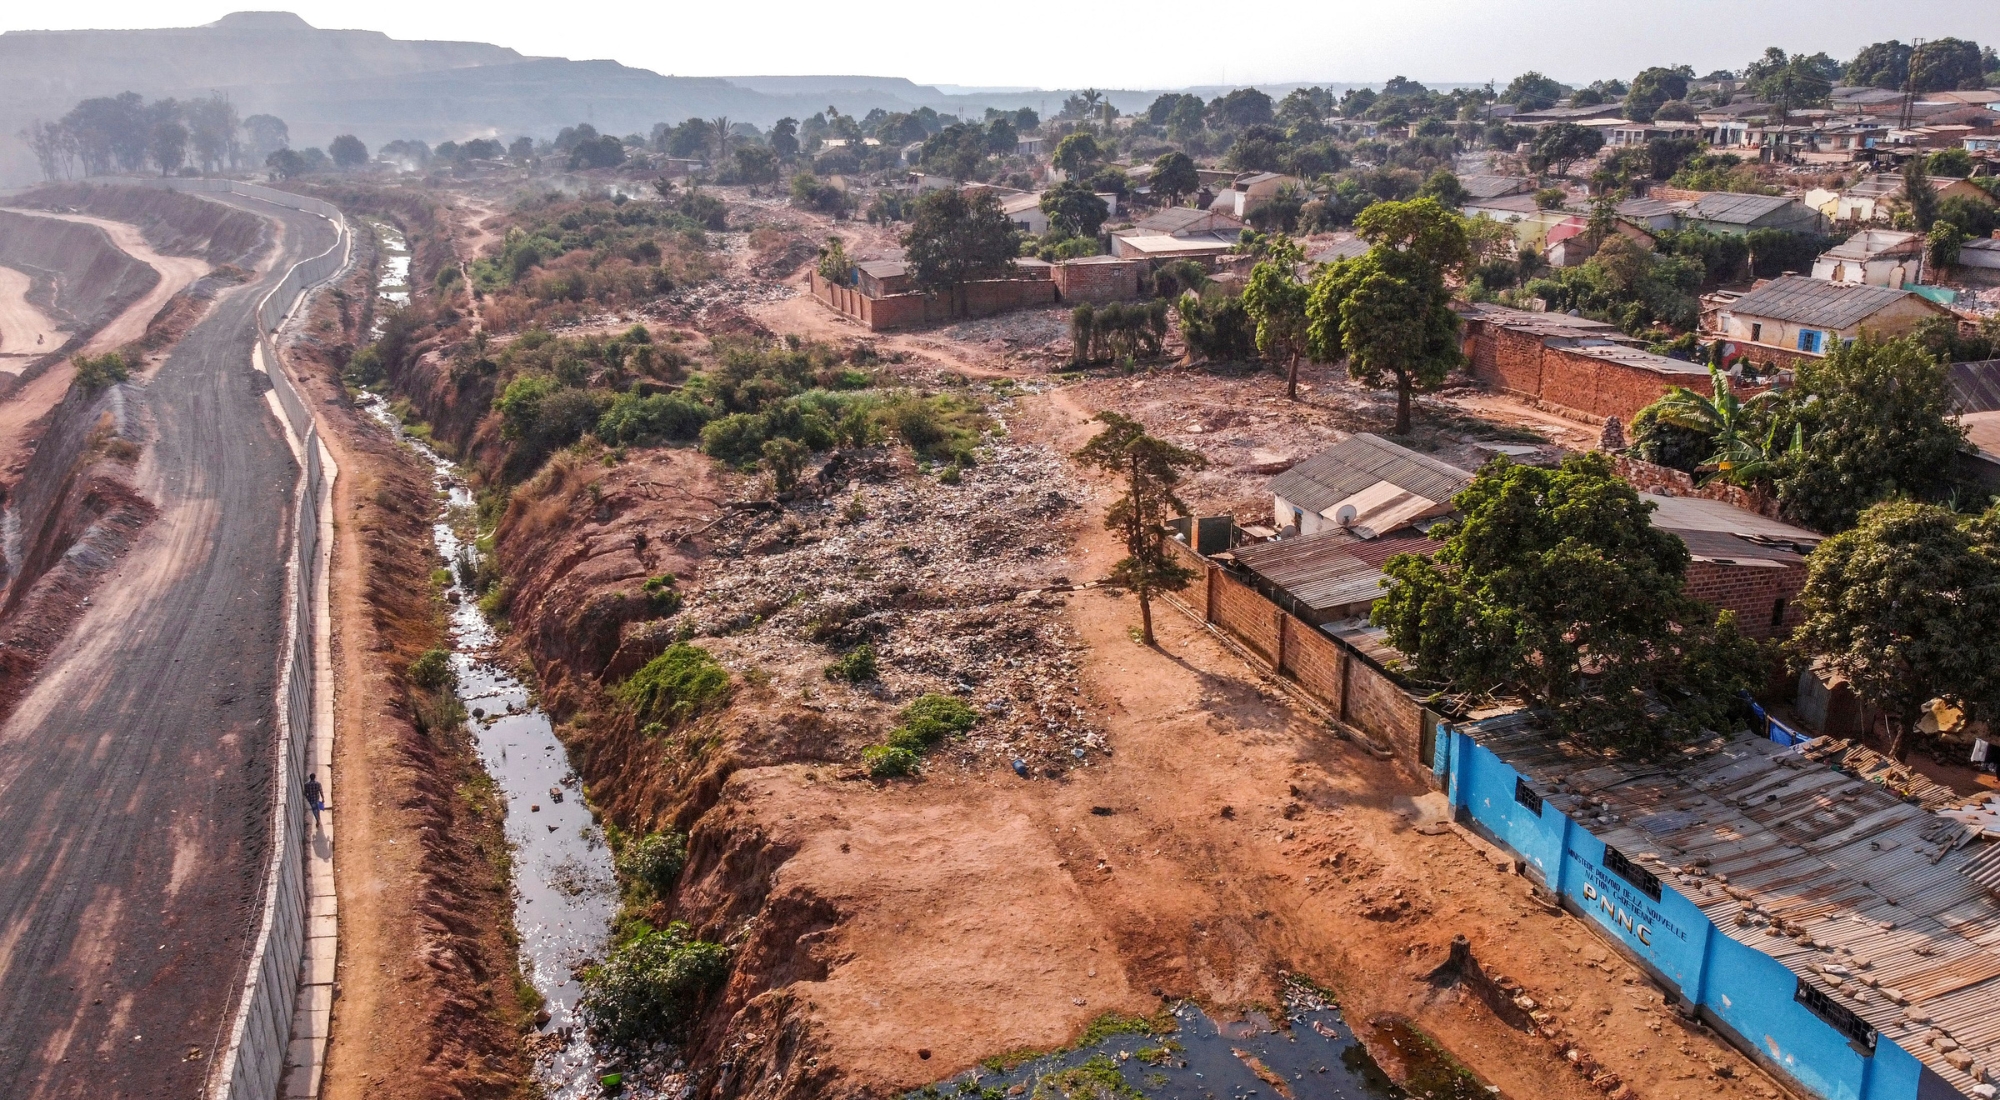 TOPSHOT - A general view of houses in the Gecamine district (General Society of Quarries and Mines of the DRC) on the edge of the abyss of the Chinese mining company COMMUS (Musonoïe Mining Company Global SAS), downtown Kolwezi on October 13, 2022. - Once a thriving neighbourhood of neat houses and tree-shaded avenues, this district of the city of Kolwezi is now nearly destroyed. Mutombo's house, surrounded by the rubble of demolished buildings, is one of the last hold-outs near the concrete barrier sealing off the open-pit mine. The Chinese-owned business wants to expand, and many nearby residents took buy-outs. (Photo by JUNIOR KANNAH/AFP via Getty Images)